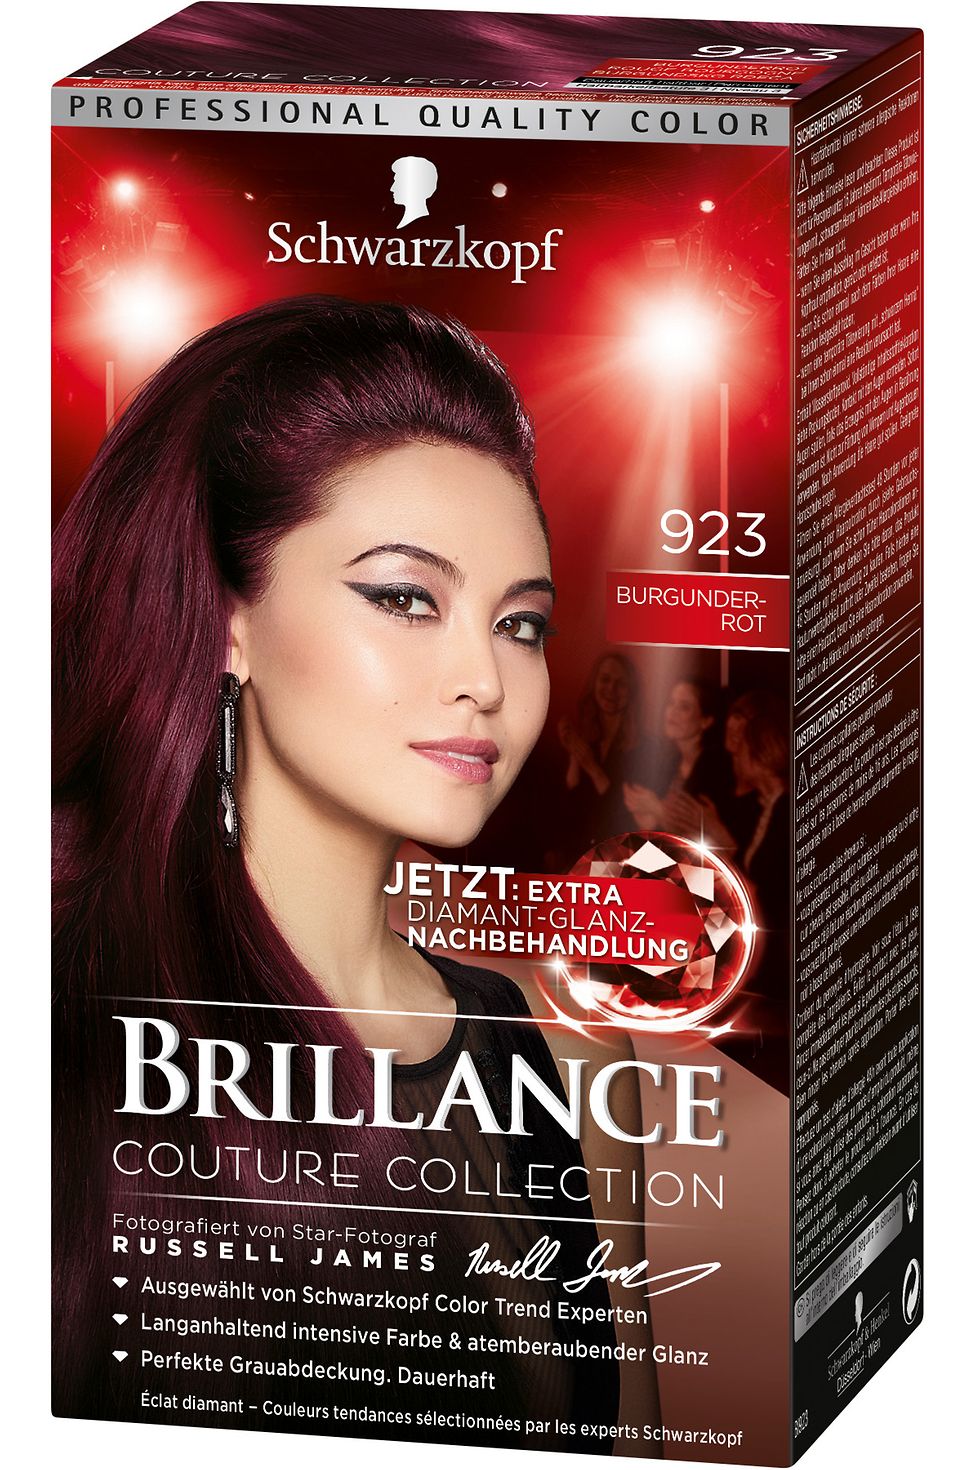 Brillance Couture Collection